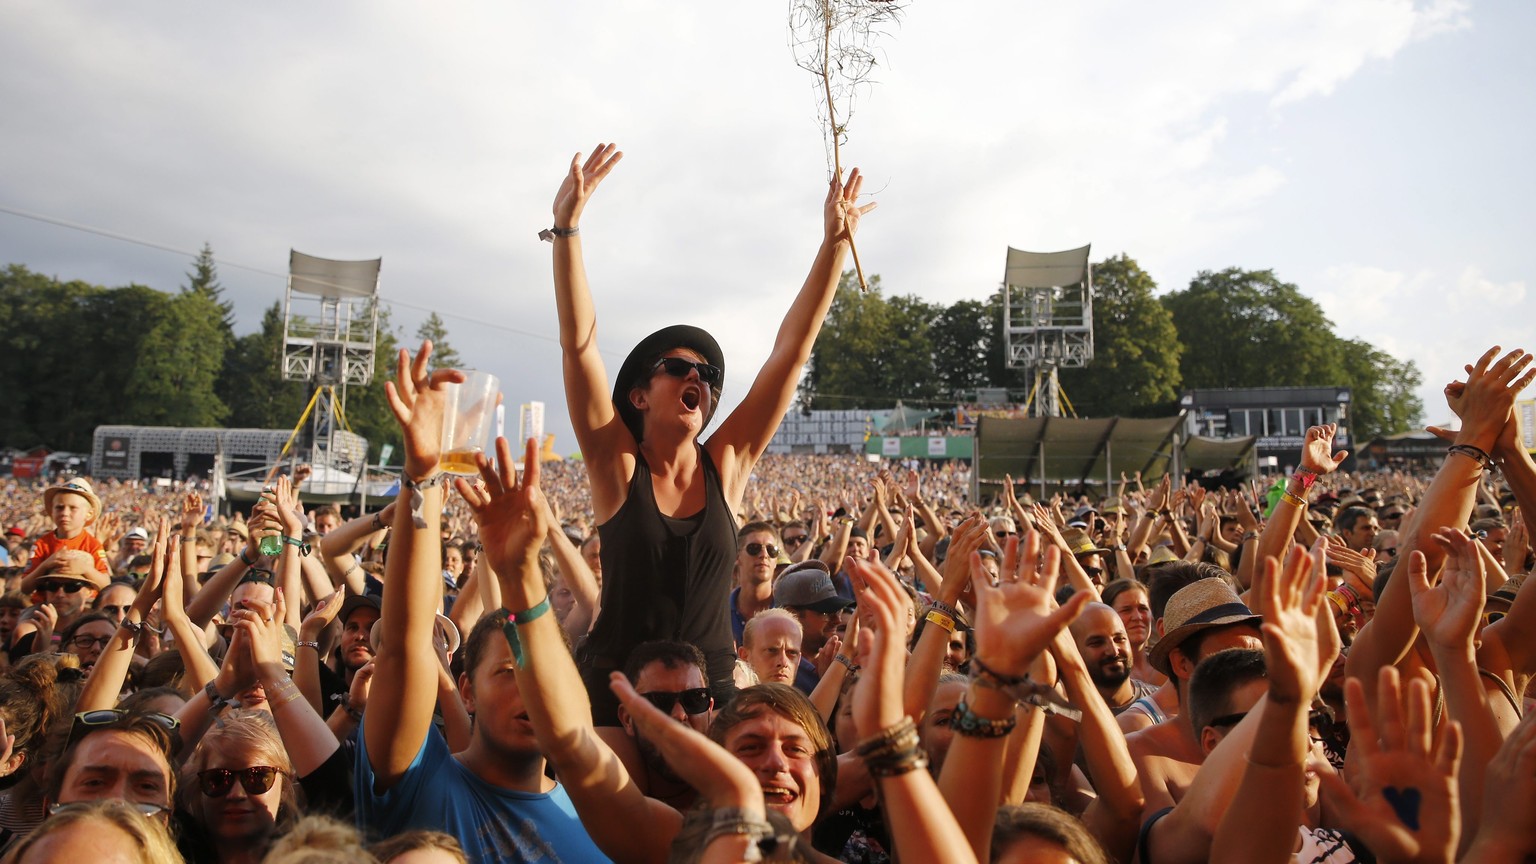 epa04853636 Fans cheer during the performance of Swiss band &#039;Patent Ochsner&#039; as they perform at the Gurten music open air festival in Bern, Switzerland, 19 July 2015. The Gurtenfestival runs ...